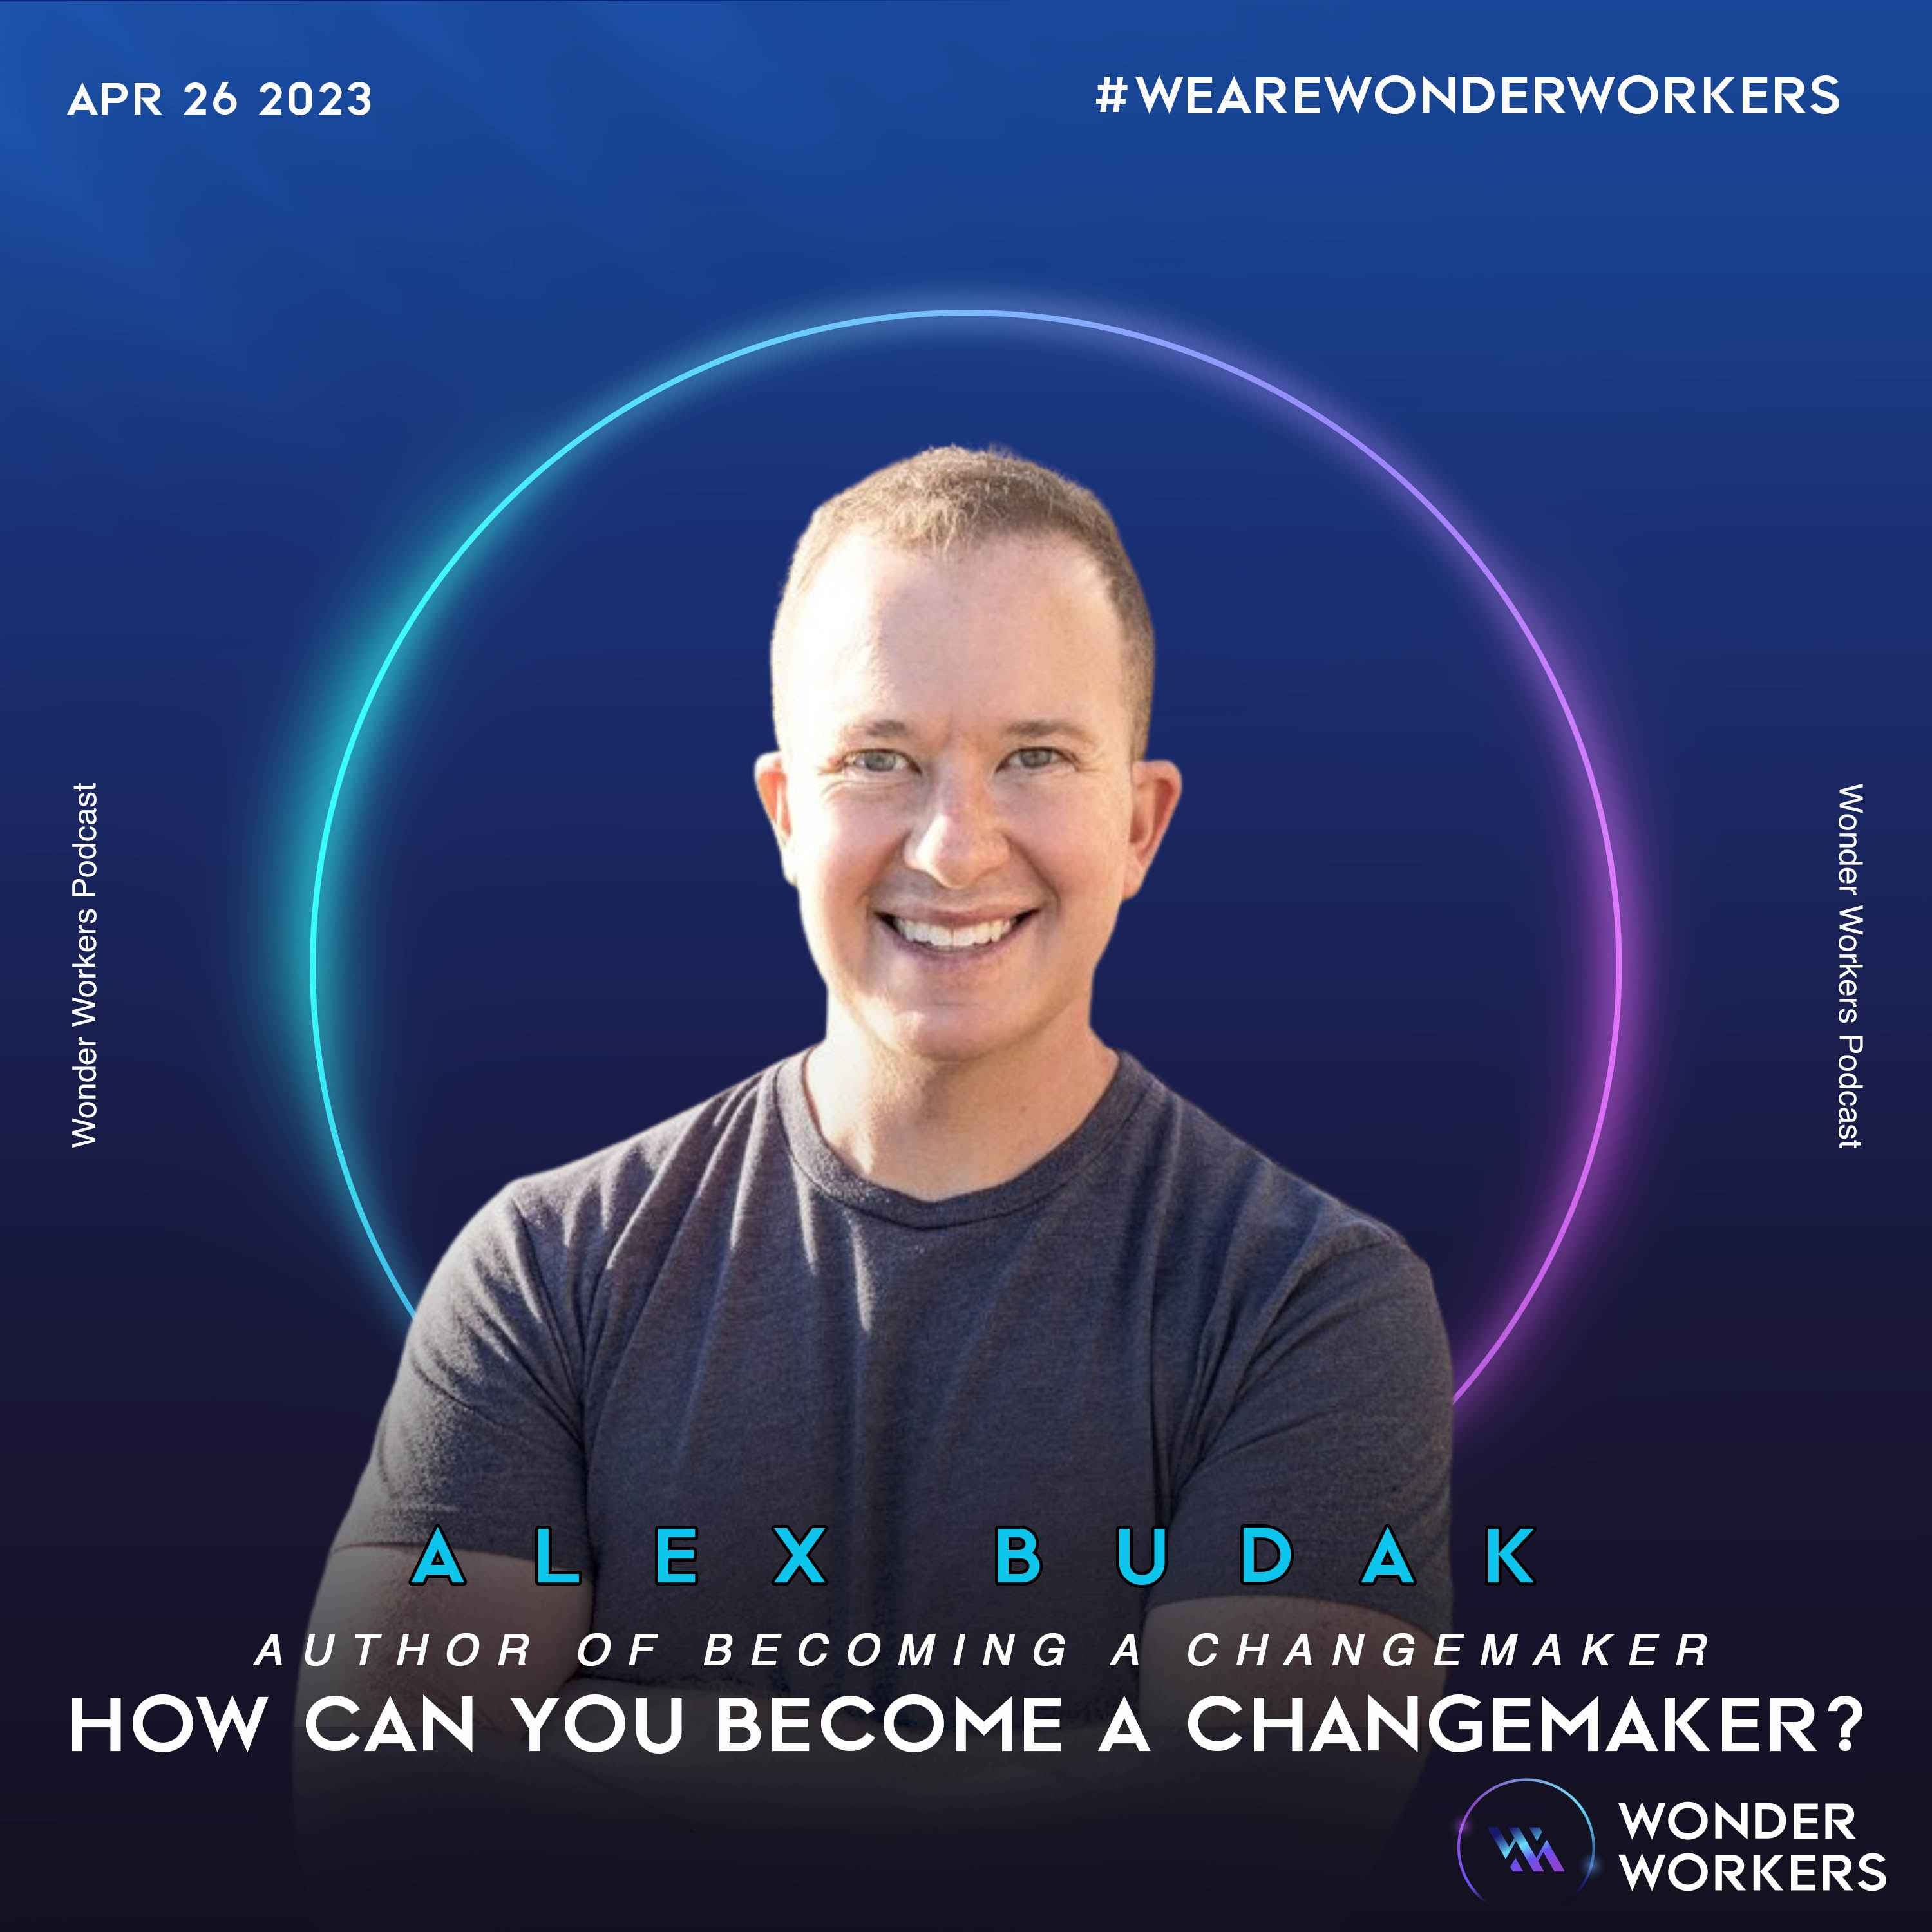 WonderWorkers 8: Alex Budak, Author of Becoming a Changemaker - What are the steps to becoming a changemaker?